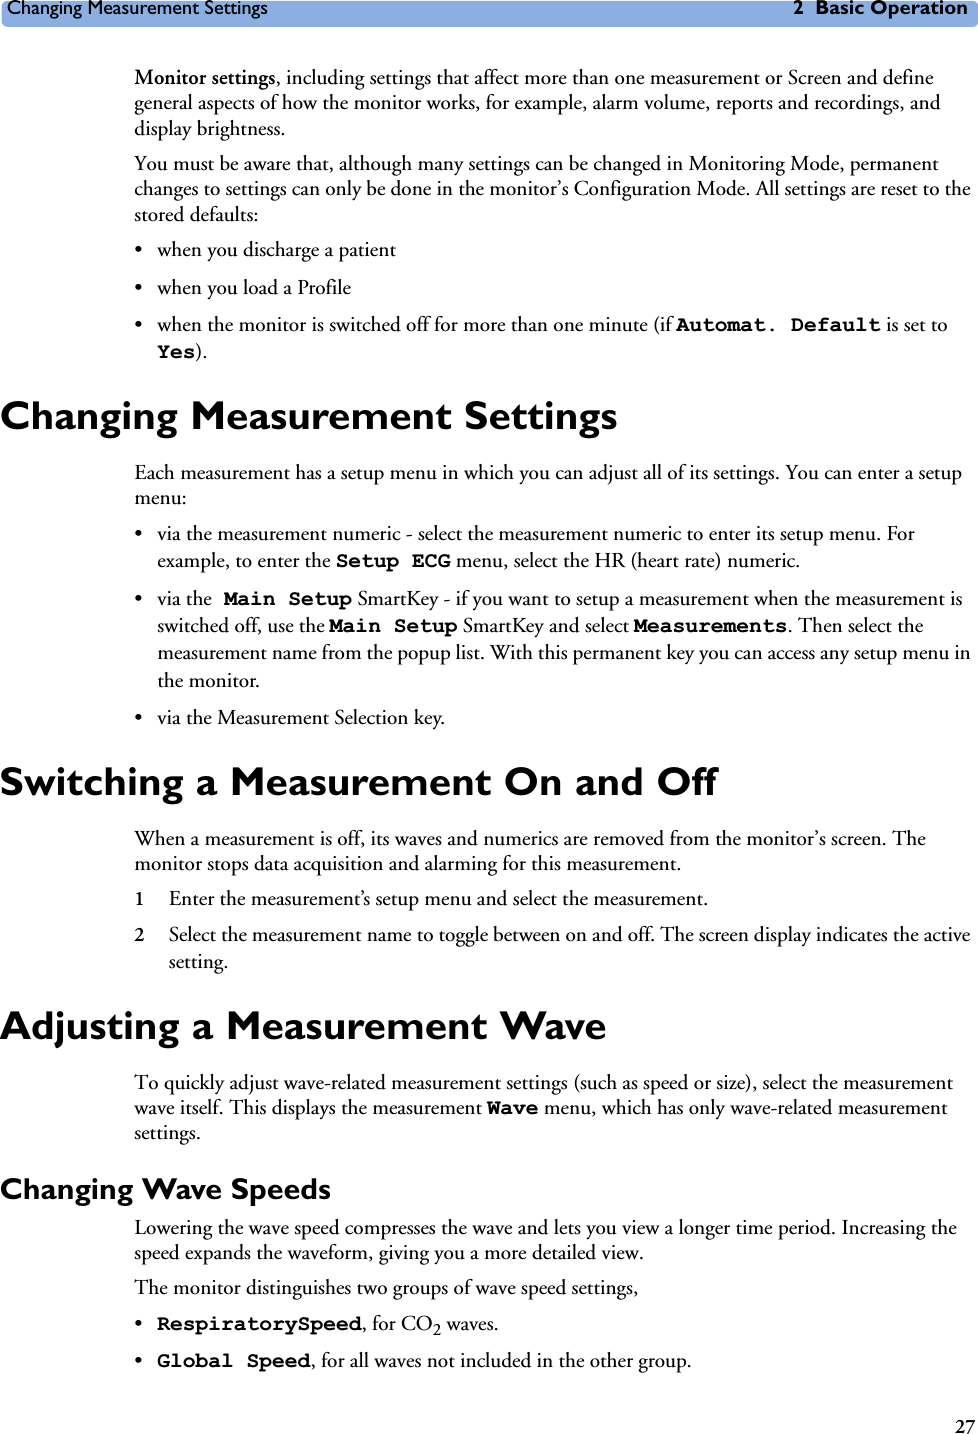 Changing Measurement Settings 2 Basic Operation27Monitor settings, including settings that affect more than one measurement or Screen and define general aspects of how the monitor works, for example, alarm volume, reports and recordings, and display brightness.You must be aware that, although many settings can be changed in Monitoring Mode, permanent changes to settings can only be done in the monitor’s Configuration Mode. All settings are reset to the stored defaults: • when you discharge a patient • when you load a Profile• when the monitor is switched off for more than one minute (if Automat. Default is set to Yes).Changing Measurement SettingsEach measurement has a setup menu in which you can adjust all of its settings. You can enter a setup menu:• via the measurement numeric - select the measurement numeric to enter its setup menu. For example, to enter the Setup ECG menu, select the HR (heart rate) numeric.•via the Main Setup SmartKey - if you want to setup a measurement when the measurement is switched off, use the Main Setup SmartKey and select Measurements. Then select the measurement name from the popup list. With this permanent key you can access any setup menu in the monitor.• via the Measurement Selection key.Switching a Measurement On and OffWhen a measurement is off, its waves and numerics are removed from the monitor’s screen. The monitor stops data acquisition and alarming for this measurement. 1Enter the measurement’s setup menu and select the measurement.2Select the measurement name to toggle between on and off. The screen display indicates the active setting.Adjusting a Measurement WaveTo quickly adjust wave-related measurement settings (such as speed or size), select the measurement wave itself. This displays the measurement Wave menu, which has only wave-related measurement settings.Changing Wave SpeedsLowering the wave speed compresses the wave and lets you view a longer time period. Increasing the speed expands the waveform, giving you a more detailed view.The monitor distinguishes two groups of wave speed settings, •RespiratorySpeed, for CO2 waves.•Global Speed, for all waves not included in the other group.